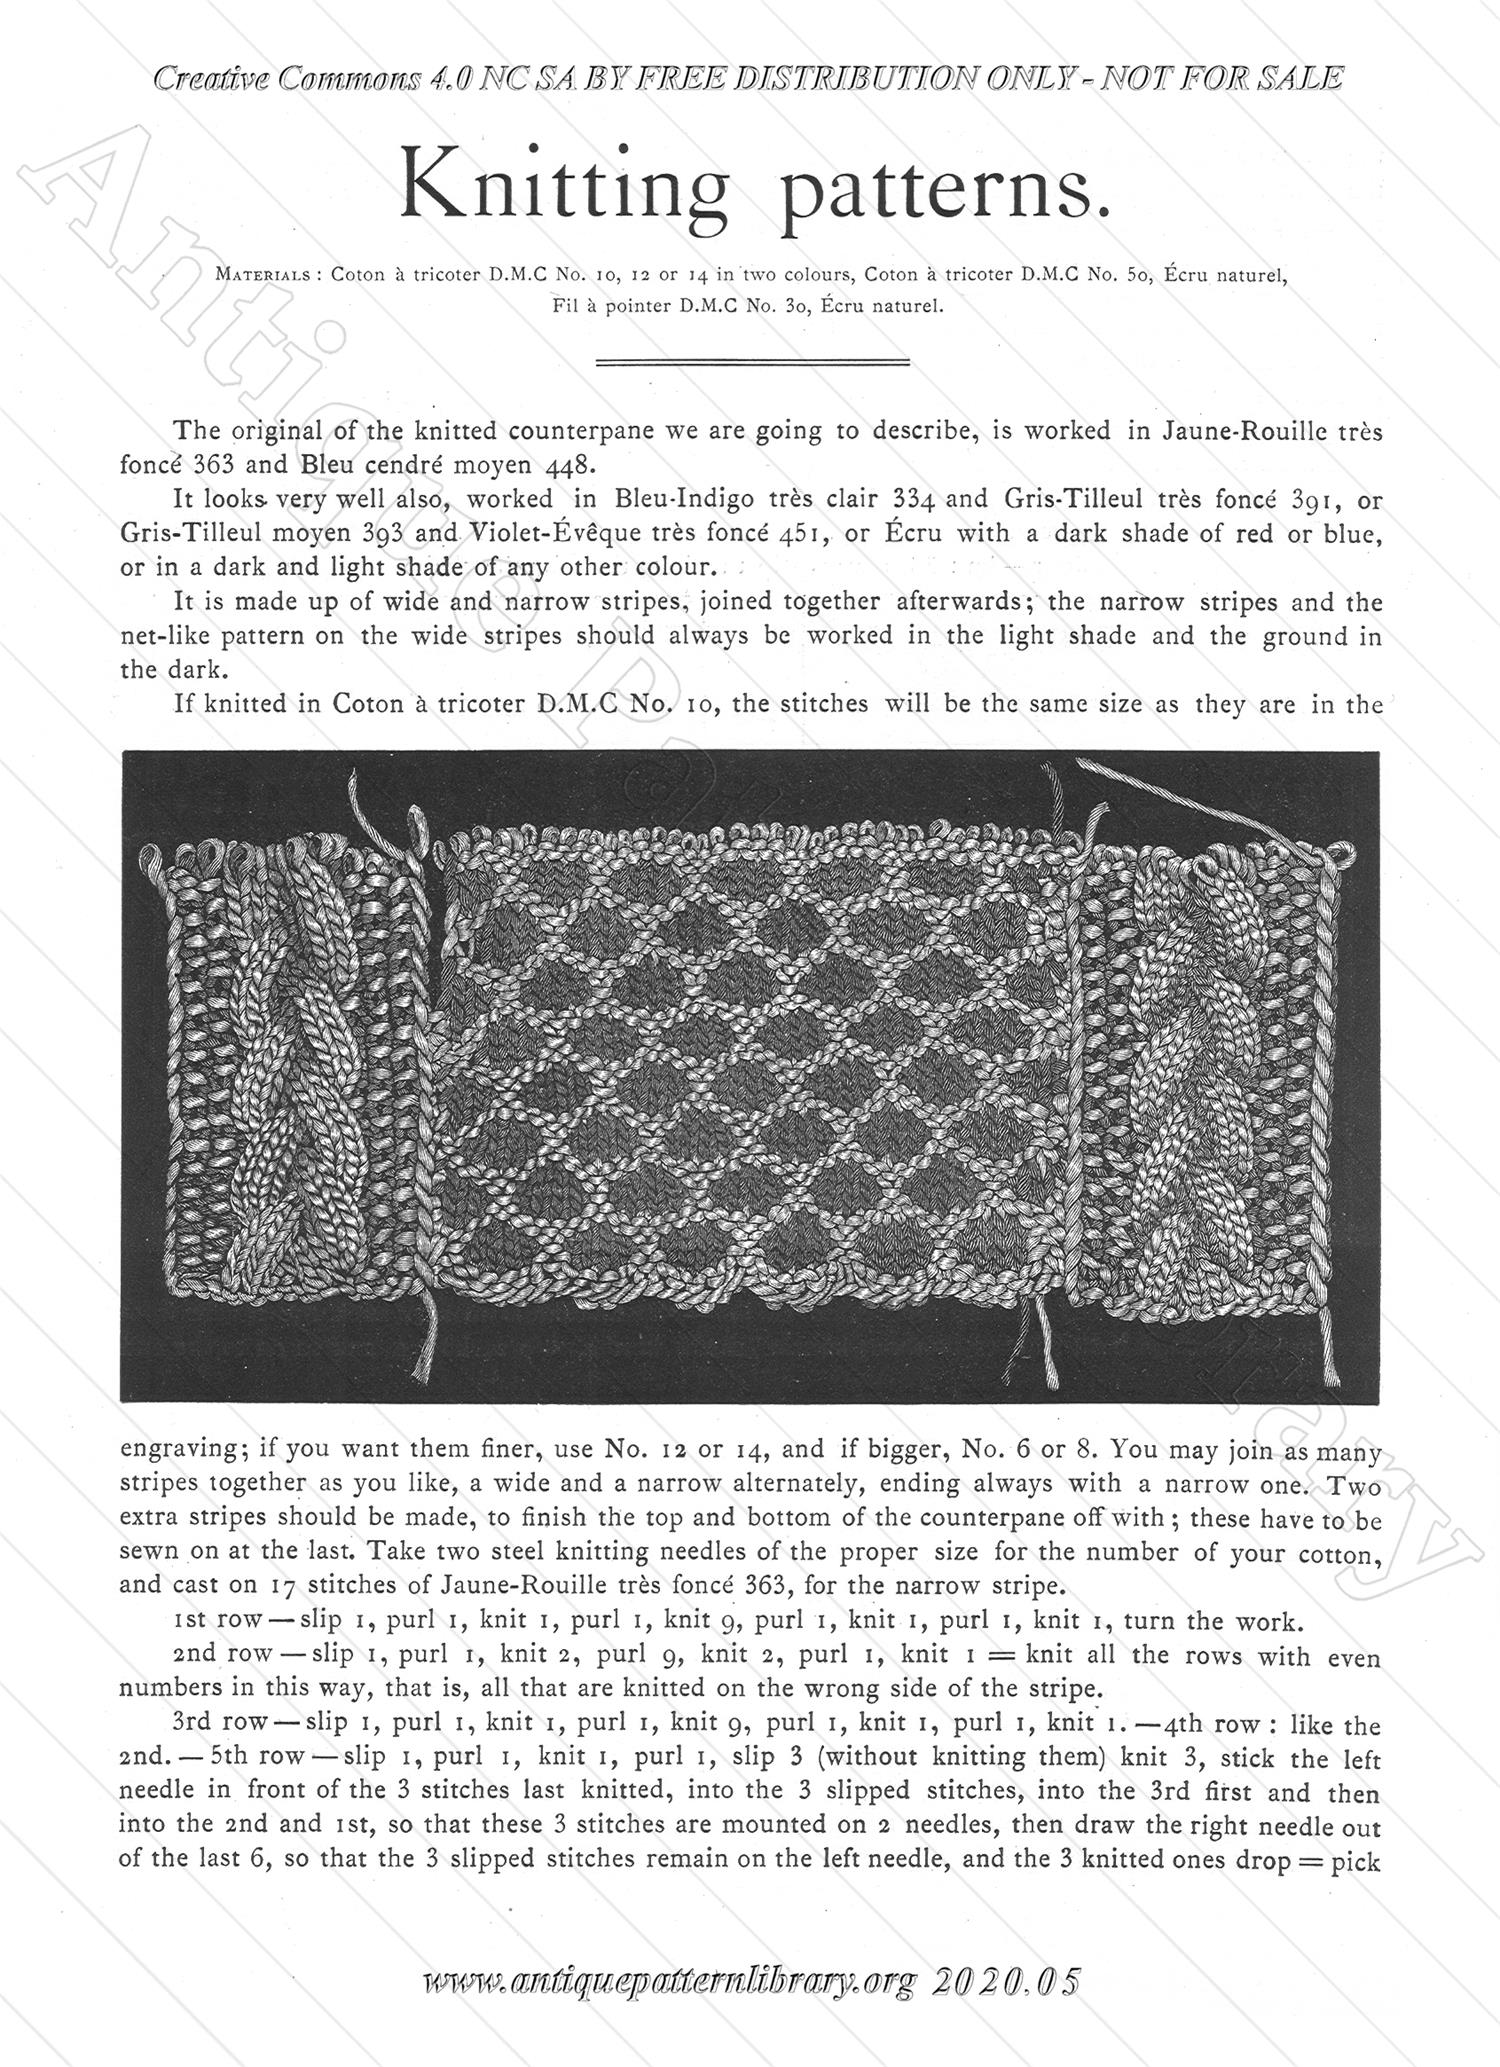 A-SW001 New Patterns in Old Style, First Part.